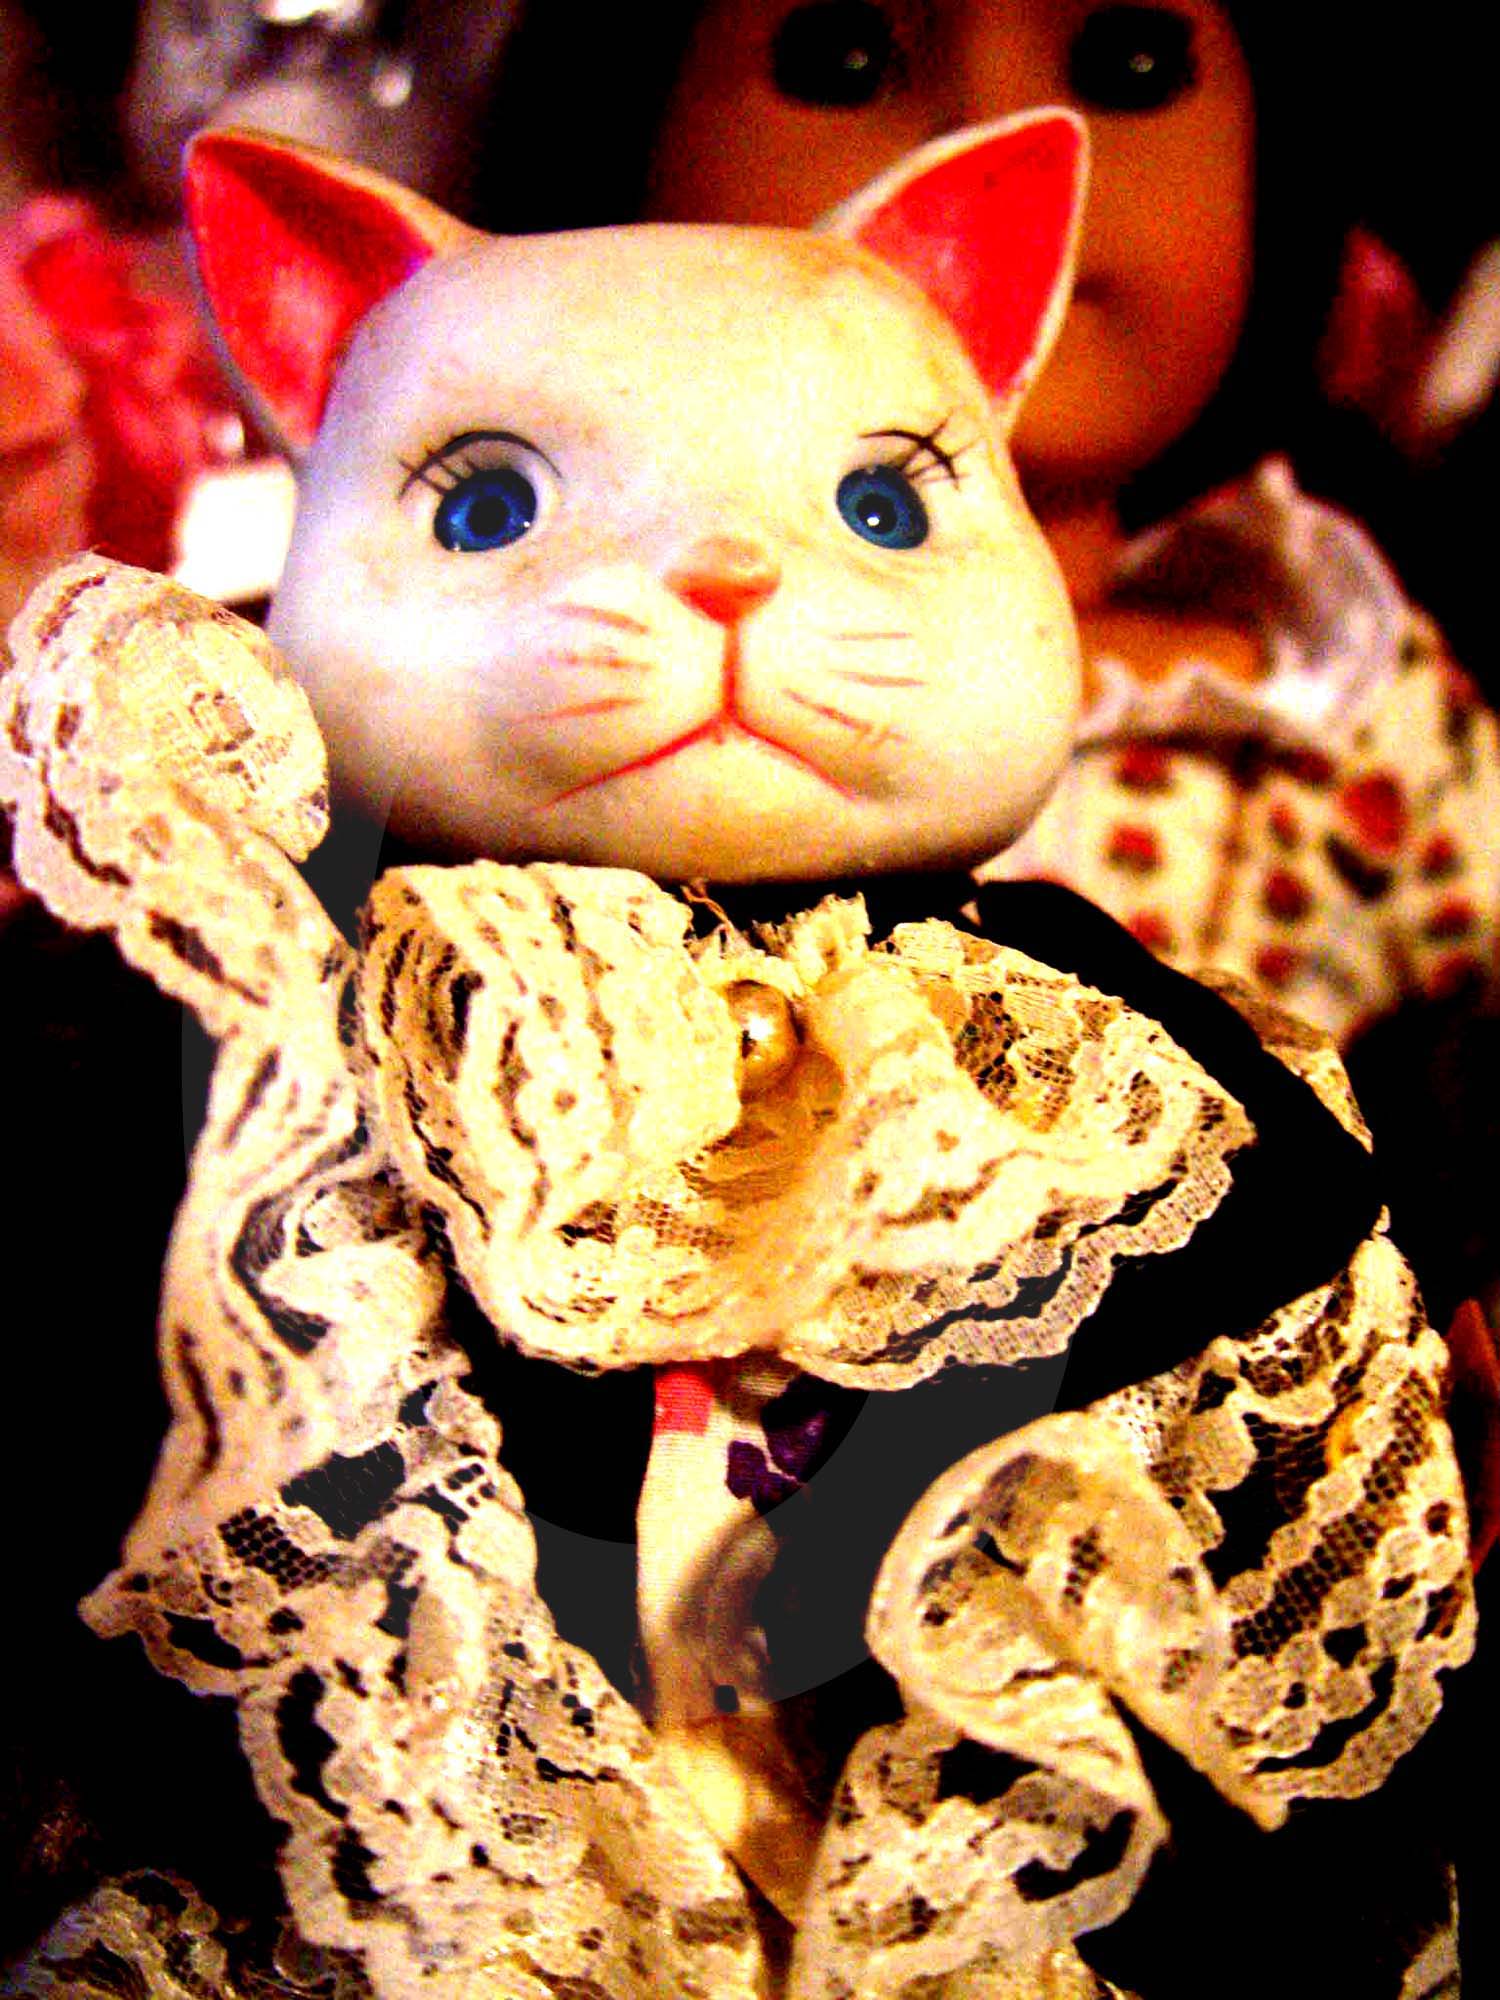 art, horror art,toys haunted,possessed objects,dolls,barbies,clowns,cats,paranormal art,paintings,psychic documentary